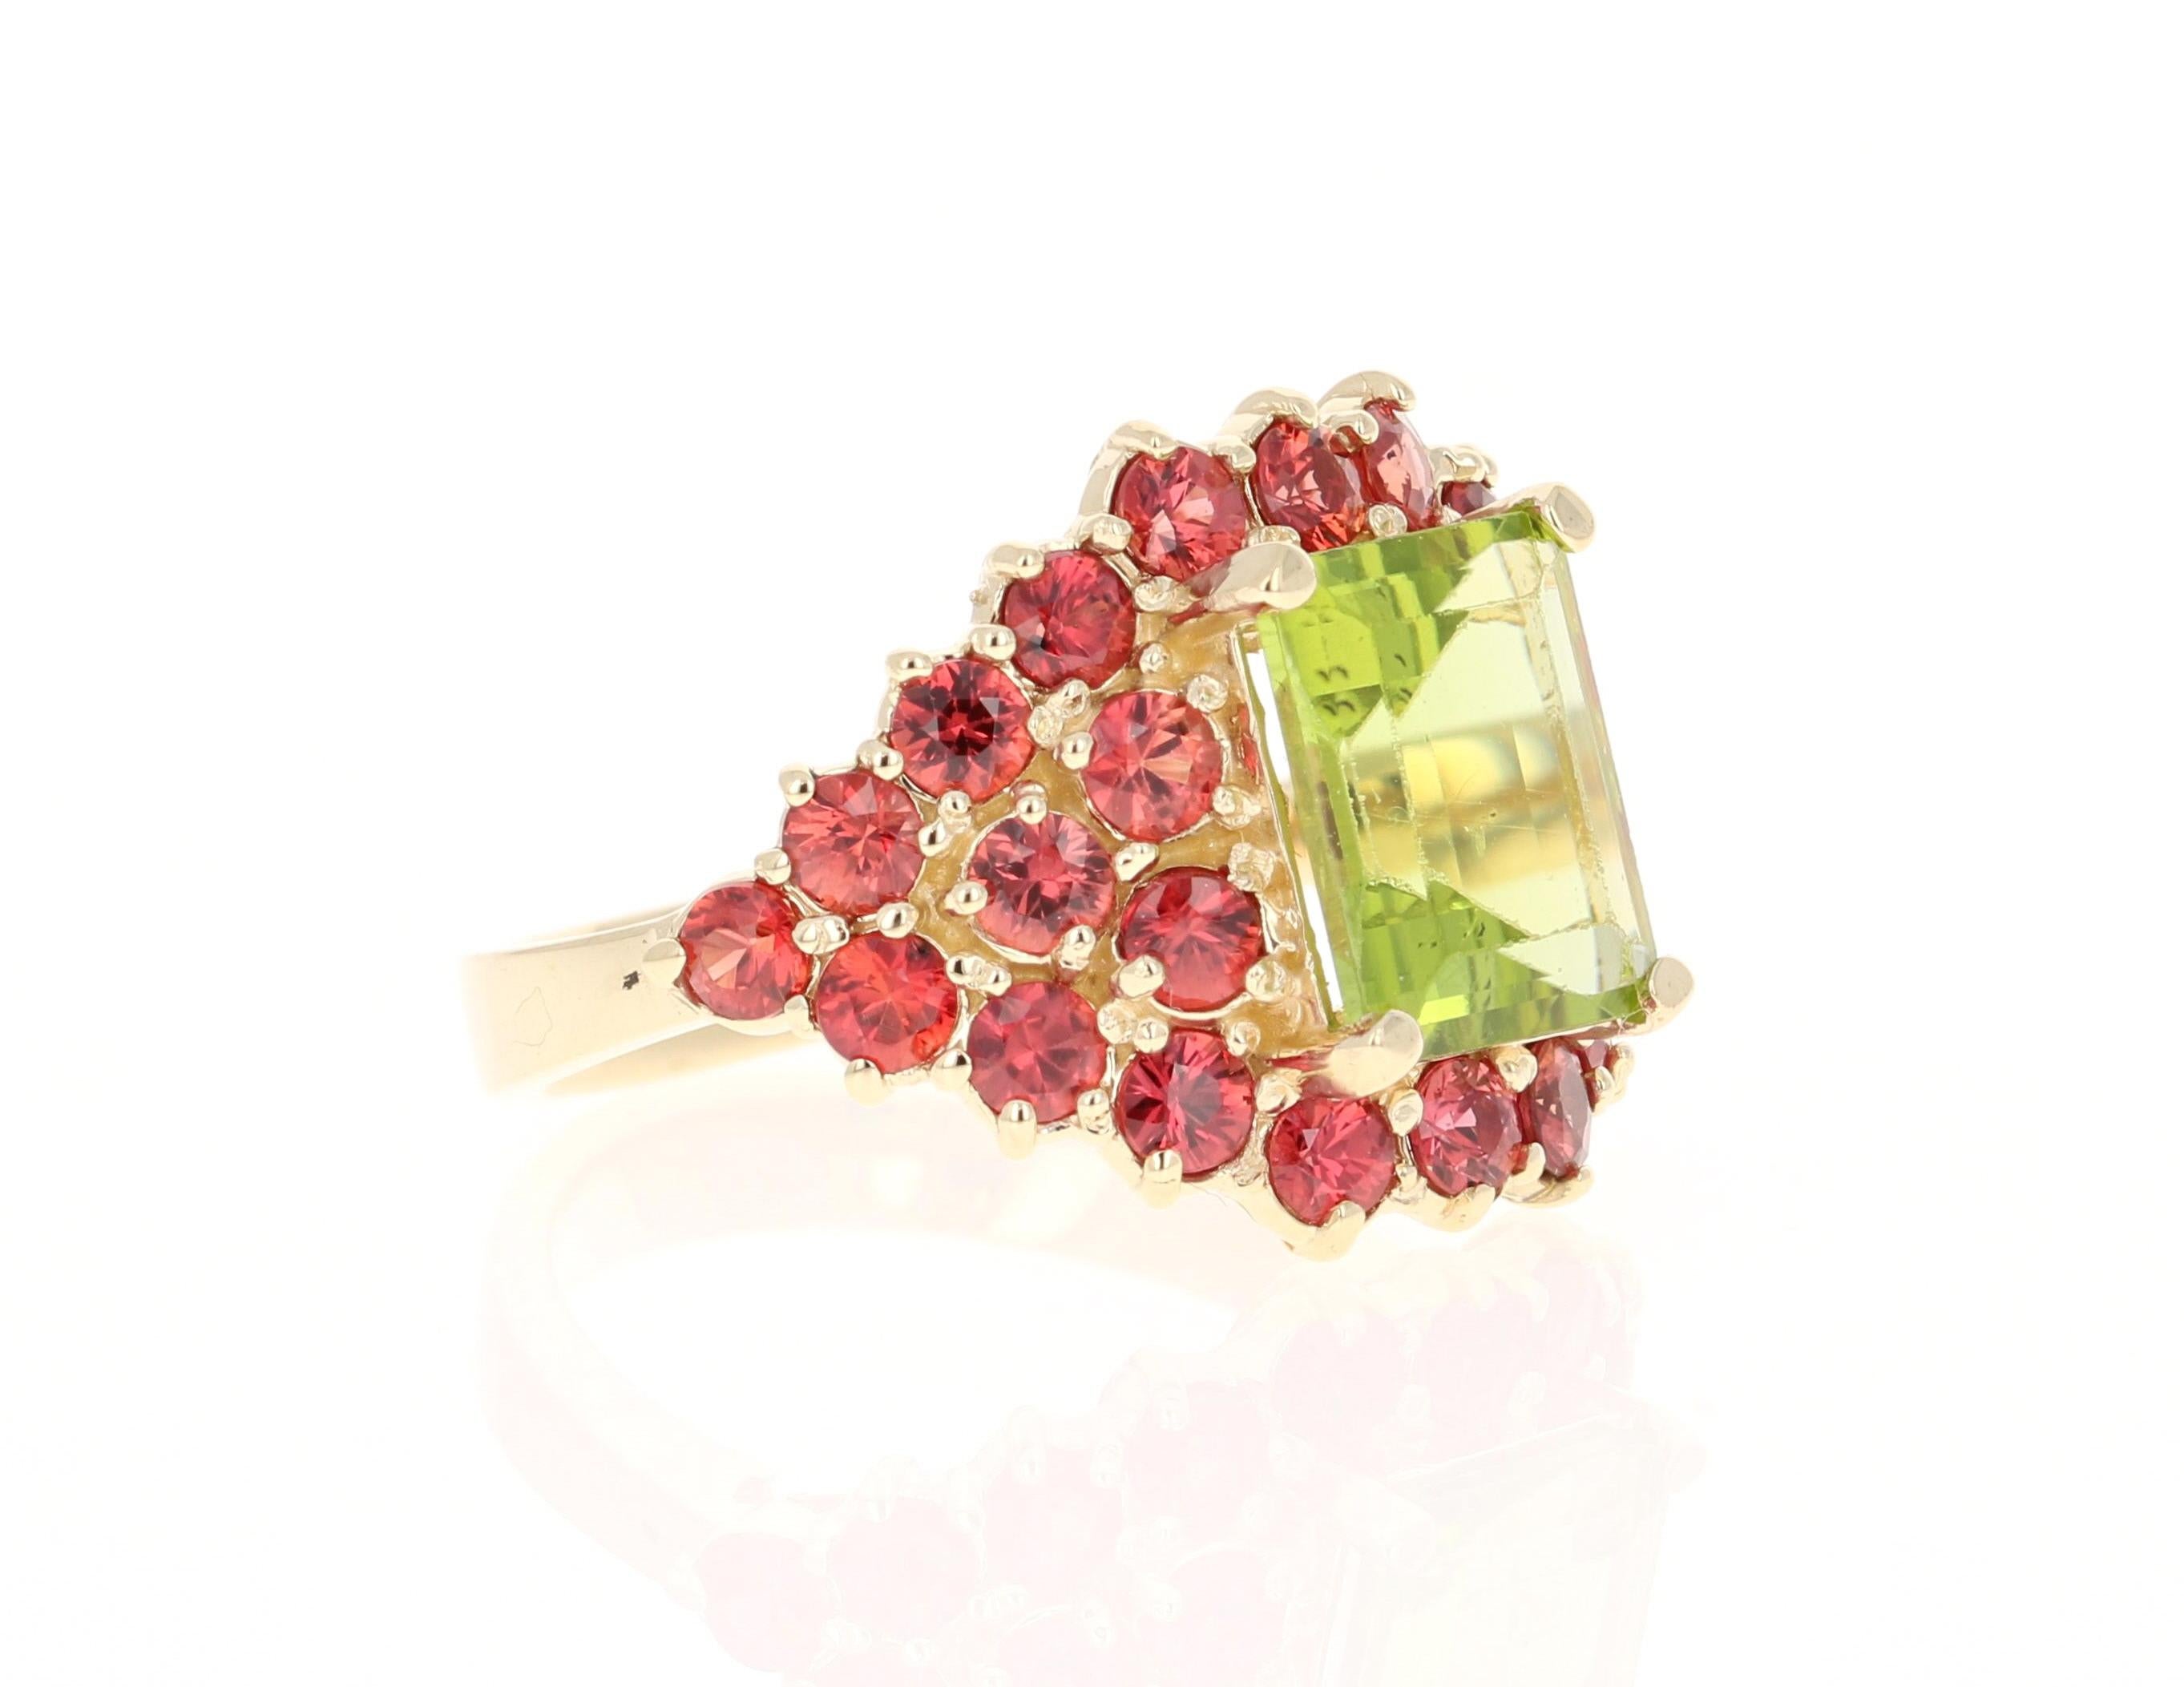 This ring has a Emerald Cut Peridot that weighs 3.35 carats and 26 Red Sapphires that weigh 2.65 carats. The total carat weight of the ring is 6.00 carats. 

The ring is curated in 14 Karat Yellow Gold and has an approximate weight of 6.9 grams